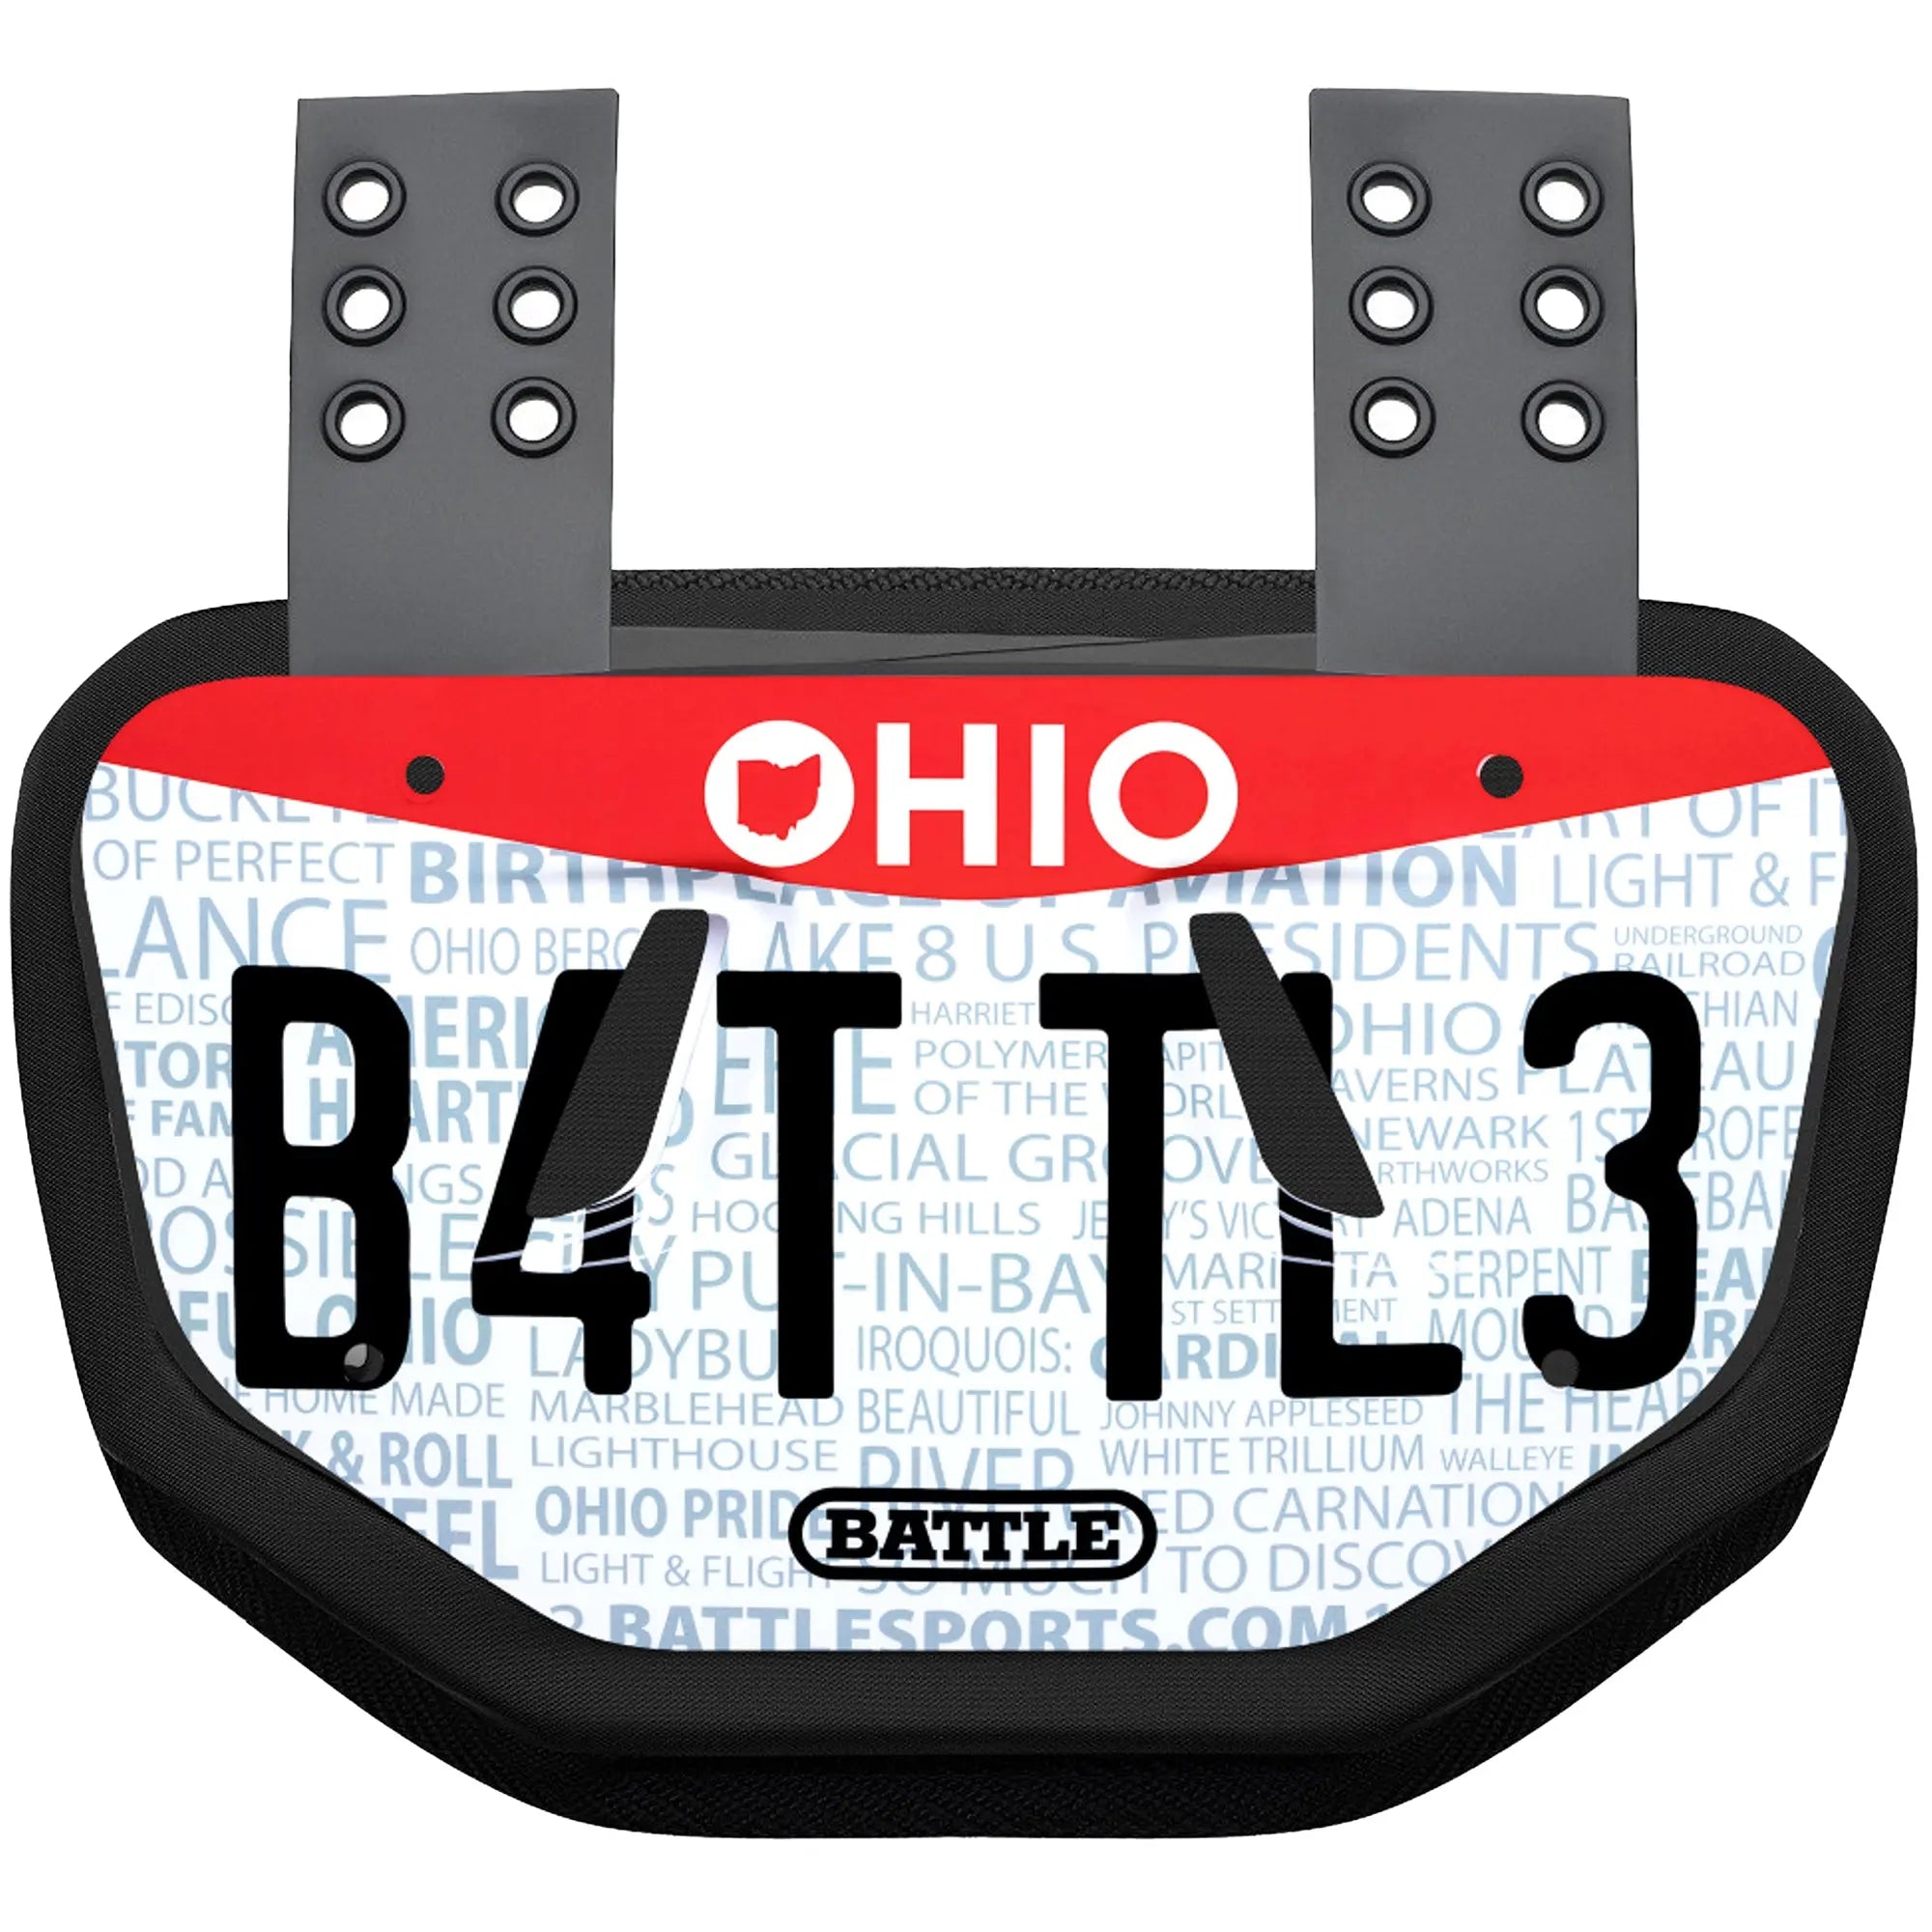 Battle Sports Adult License Plate Protective Football Back Plate Battle Sports